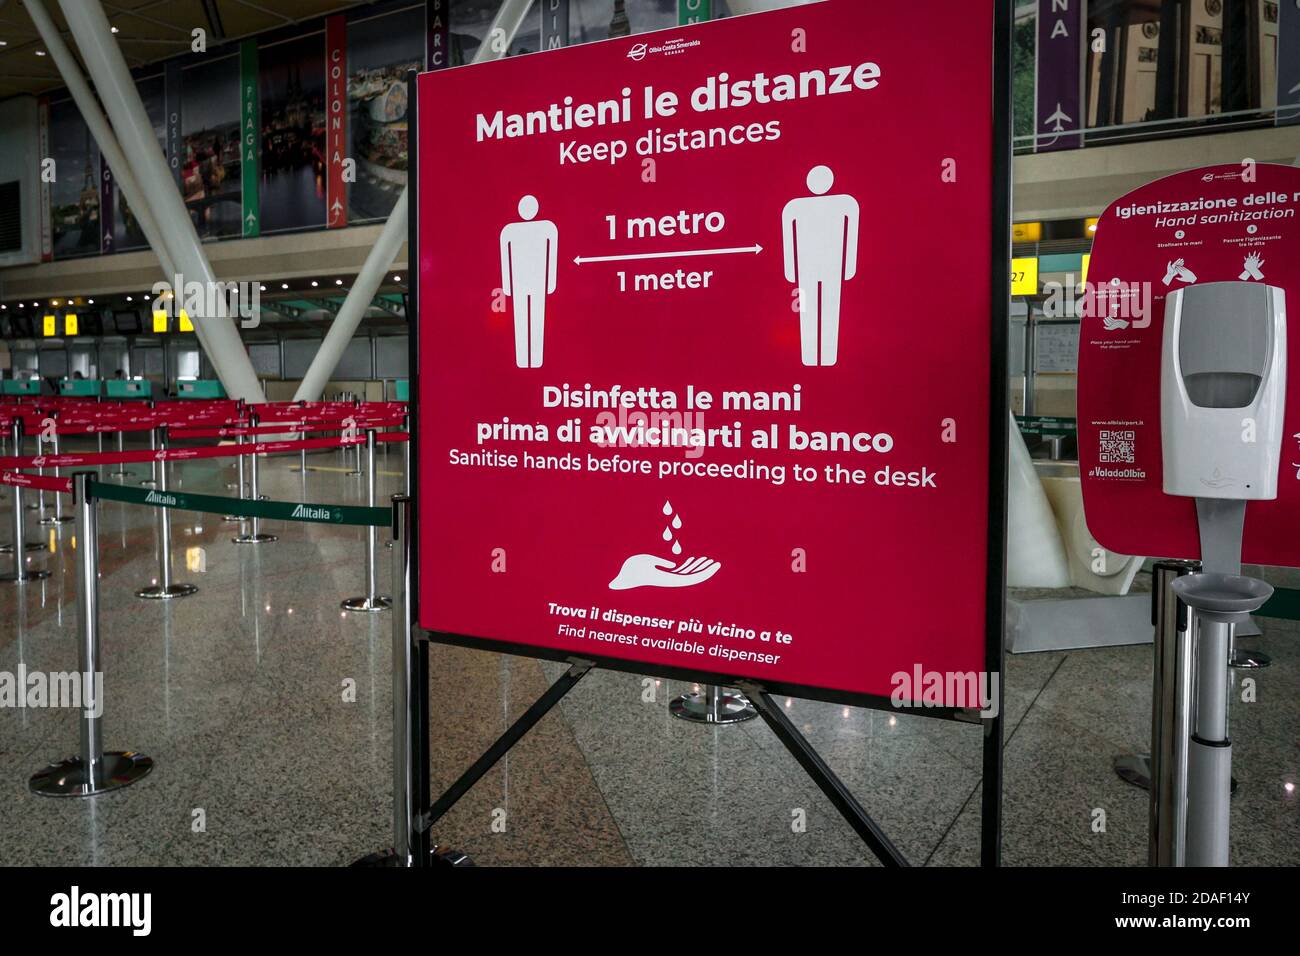 Sign at Olbia airport in Sardinia, Italy, reminds passengers to keep social distance and disinfect hands during coronavirus crisis in Italy. Stock Photo